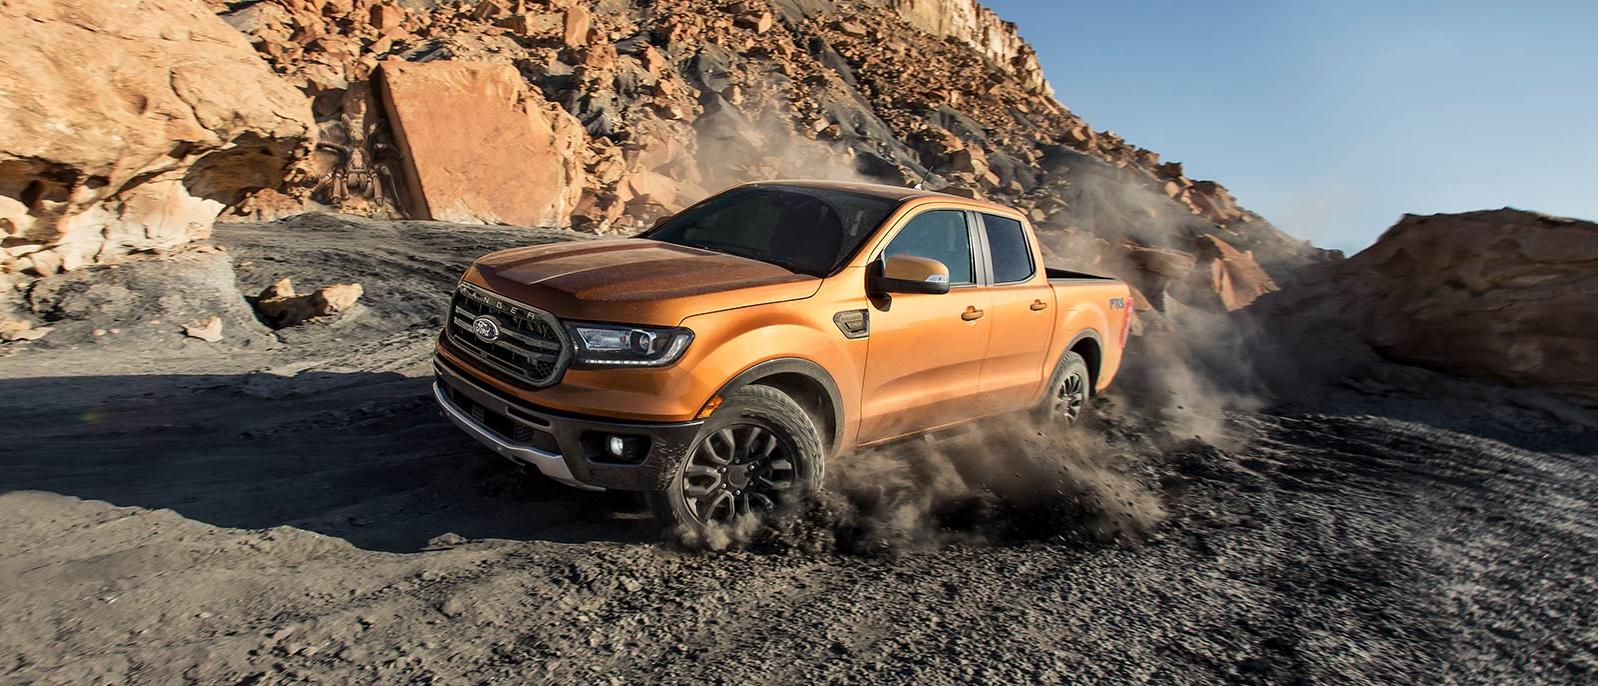 A 2022 Ford Ranger is running on the mountain road.